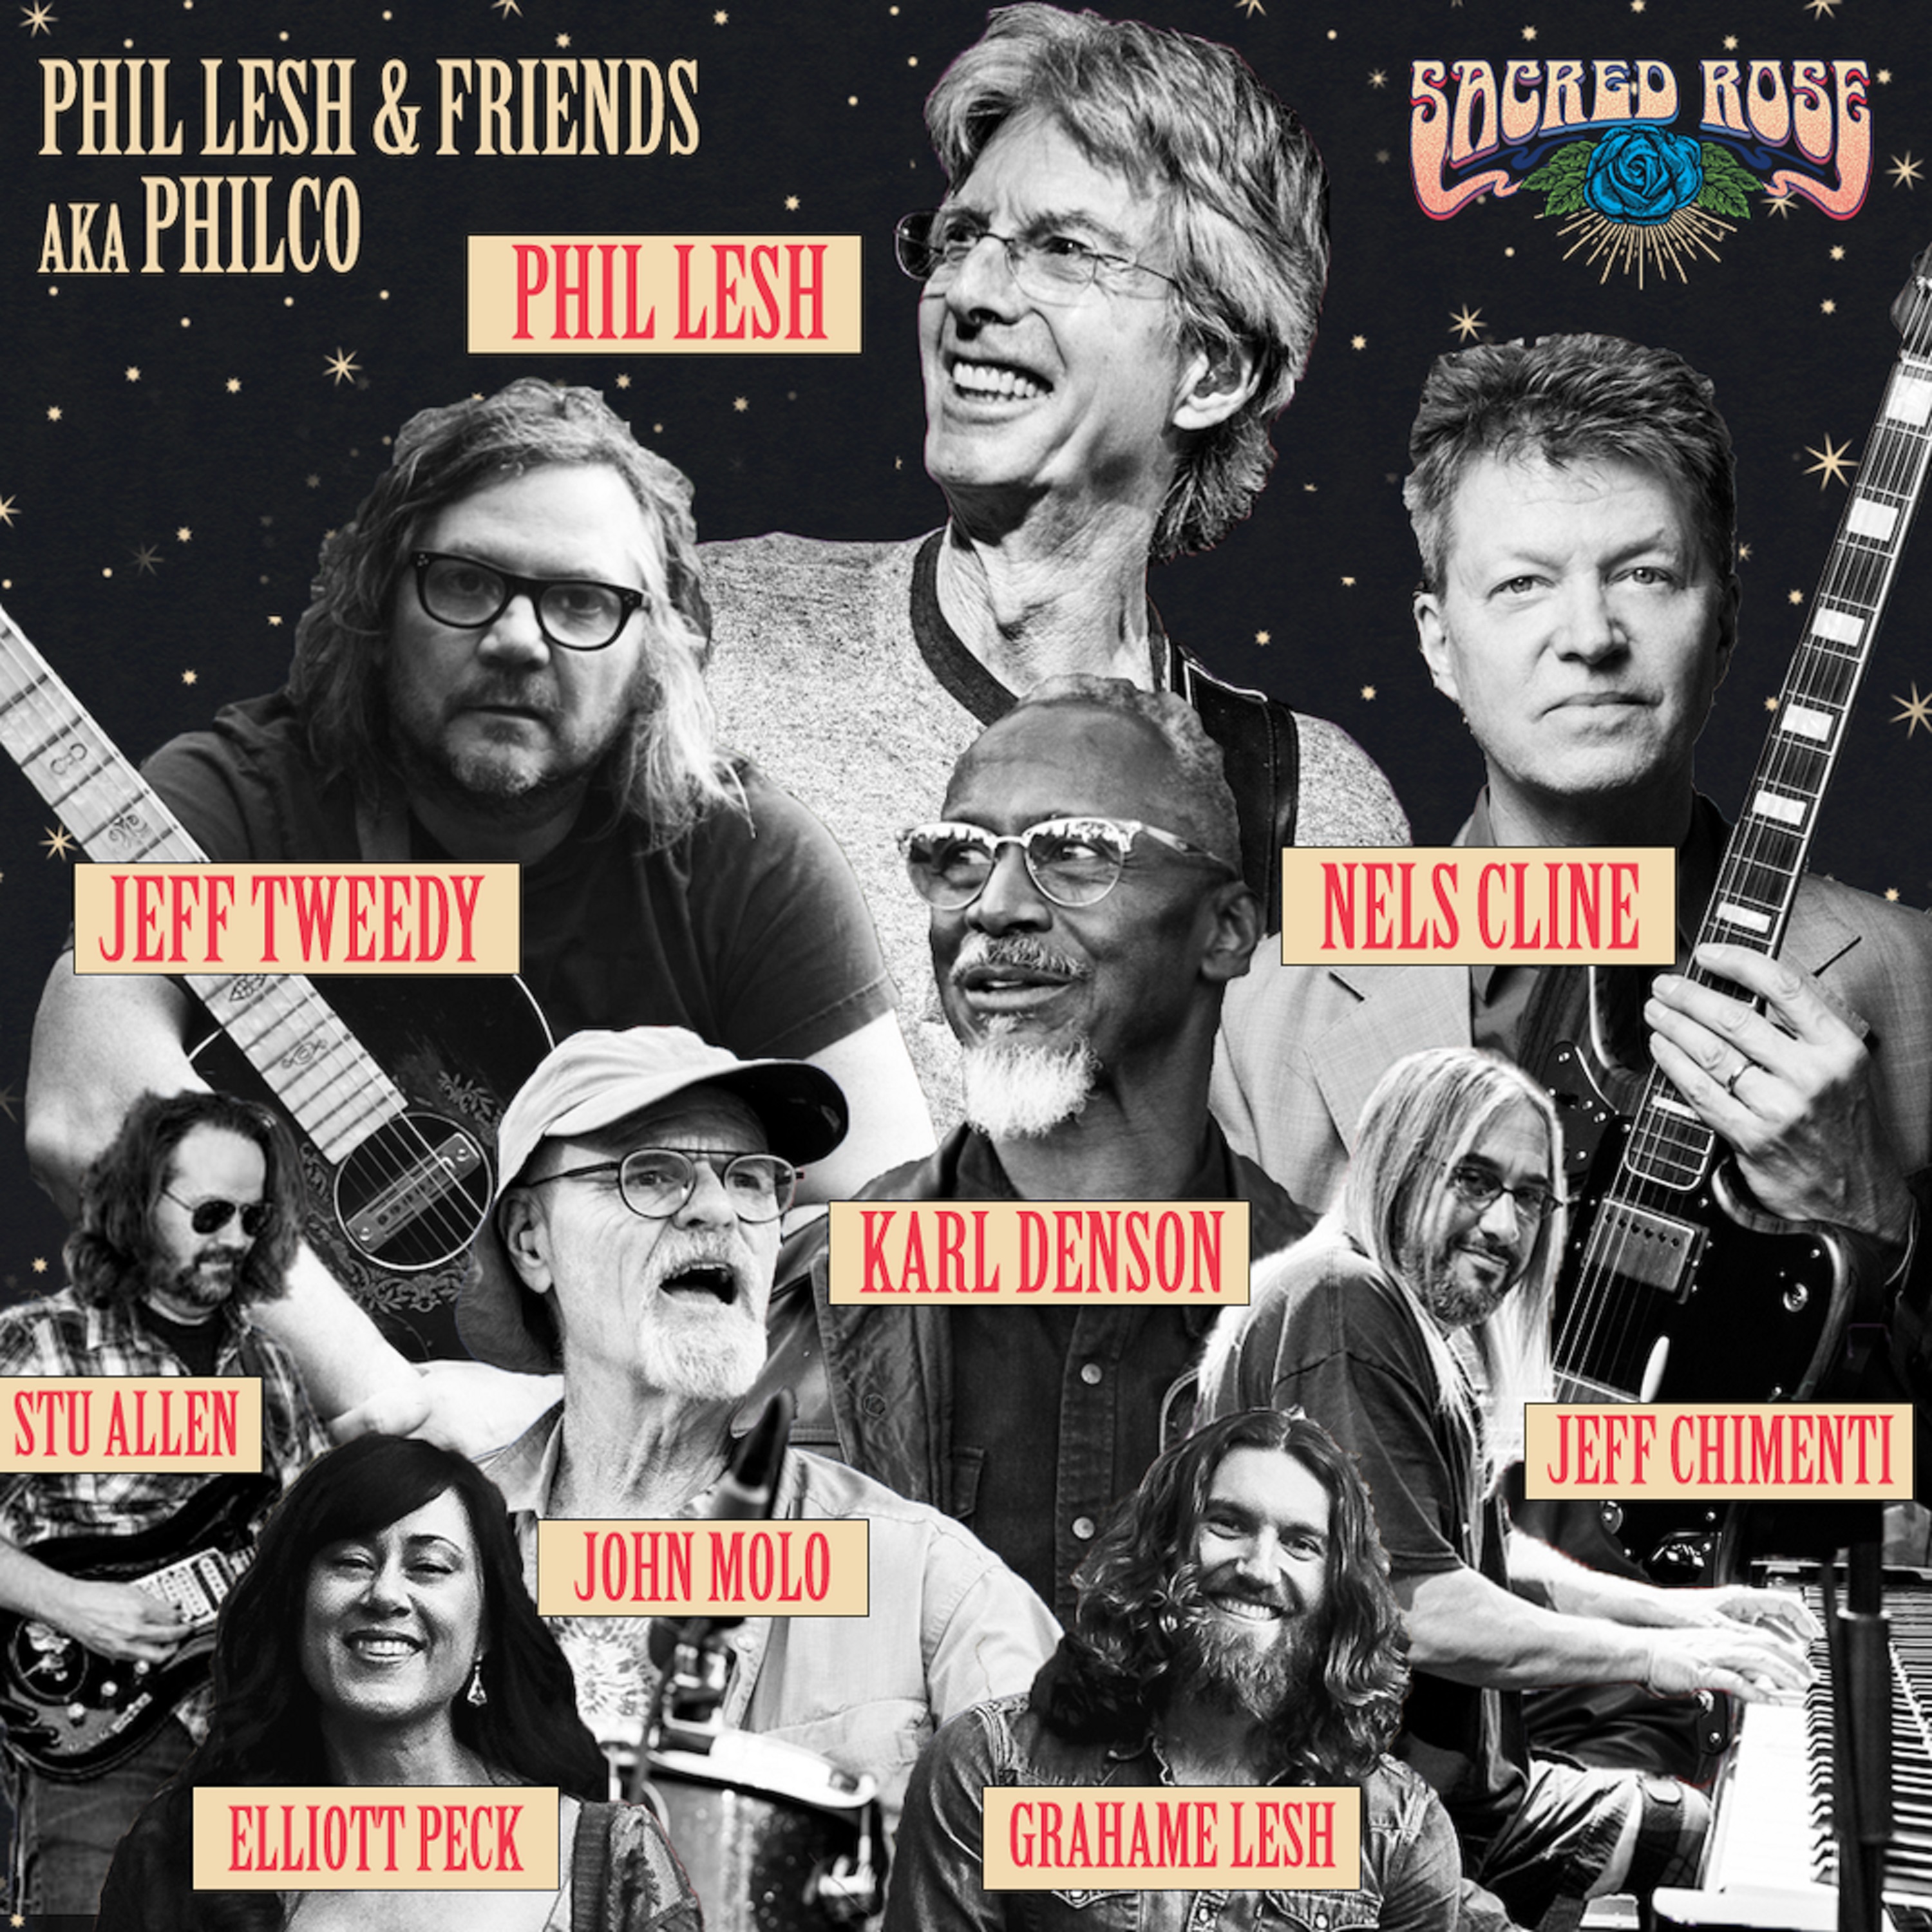 Phil Lesh & Wilco to debut ‘PHILCO’ at SACRED ROSE Festival in Chicago on Friday, August 26